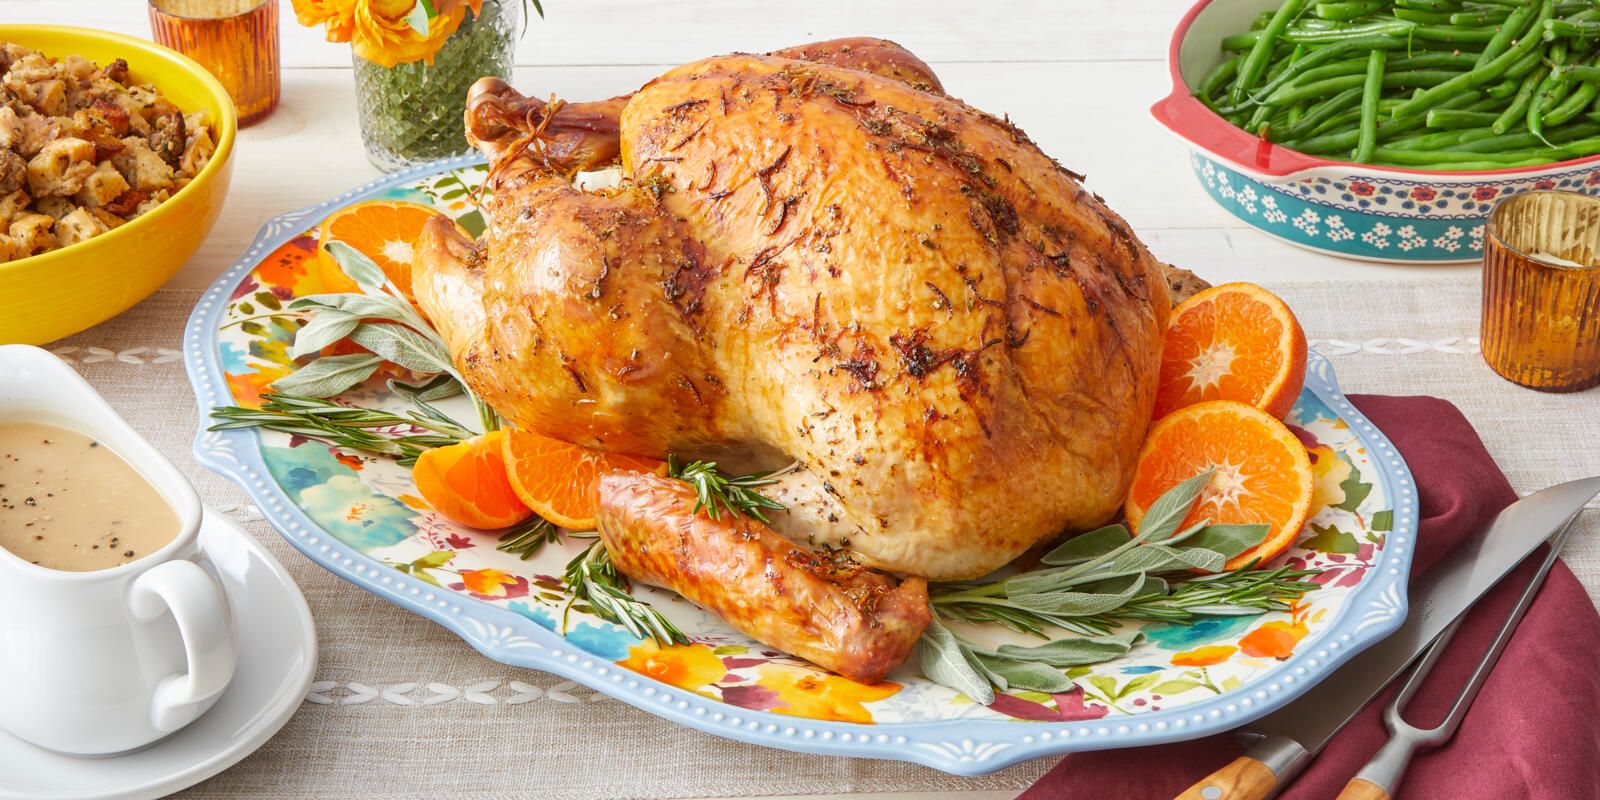 https://hips.hearstapps.com/hmg-prod/images/thanksgiving-roasted-turkey-599-preview-64e7b3b3a7a54.jpg